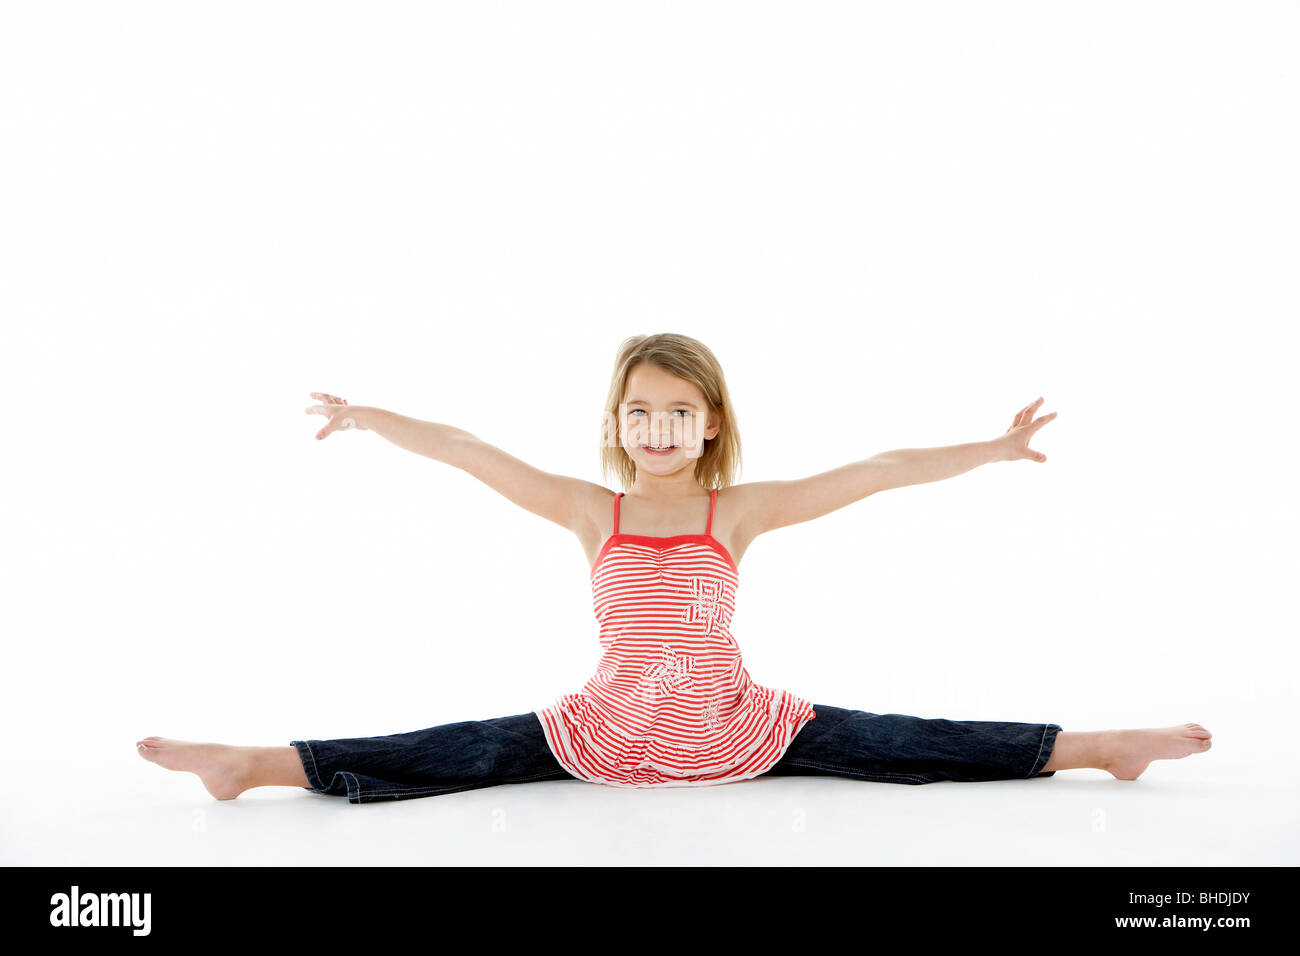 Young Girl In Gymnastic Pose Doing Splits Stock Photo